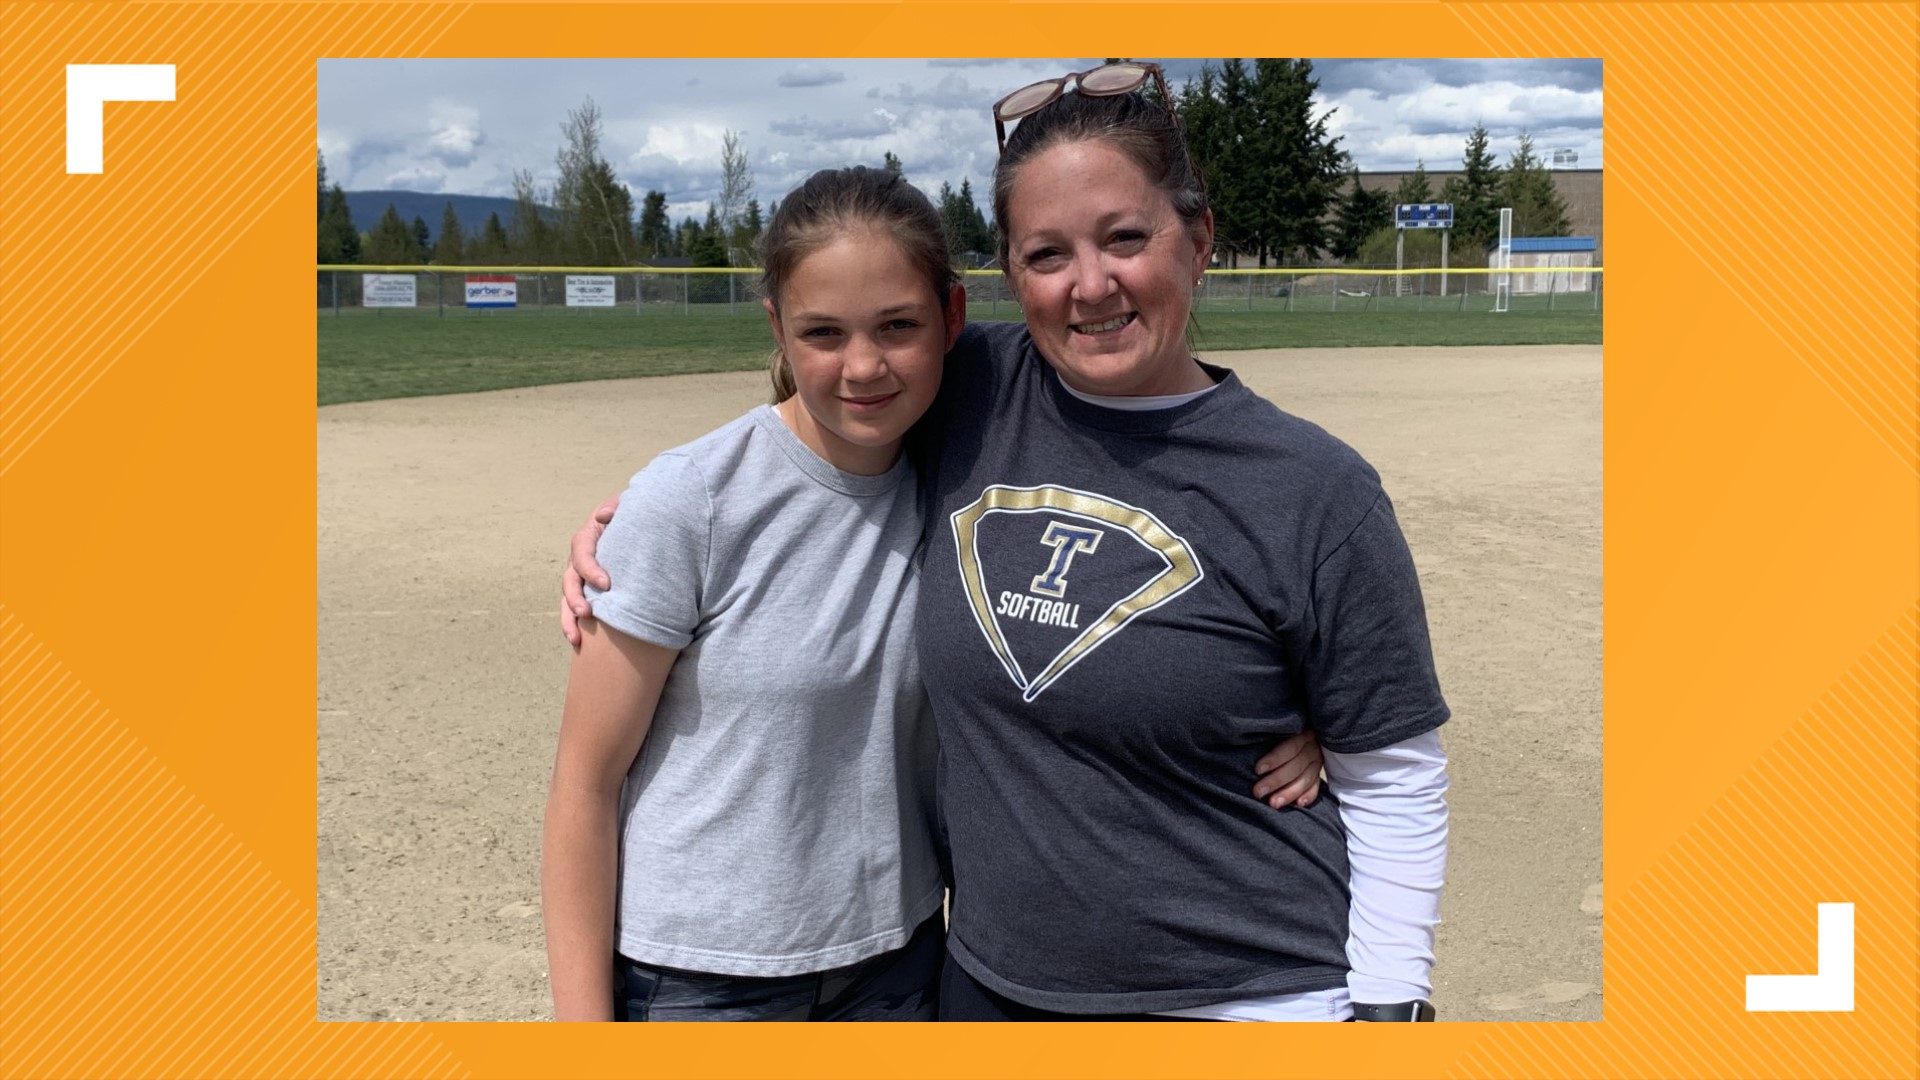 Assistant coach Jenny Whaley and daughter Casey Whaley have a special bond on the field. Getting to this point wasn't easy, but Casey's perseverance shined through.